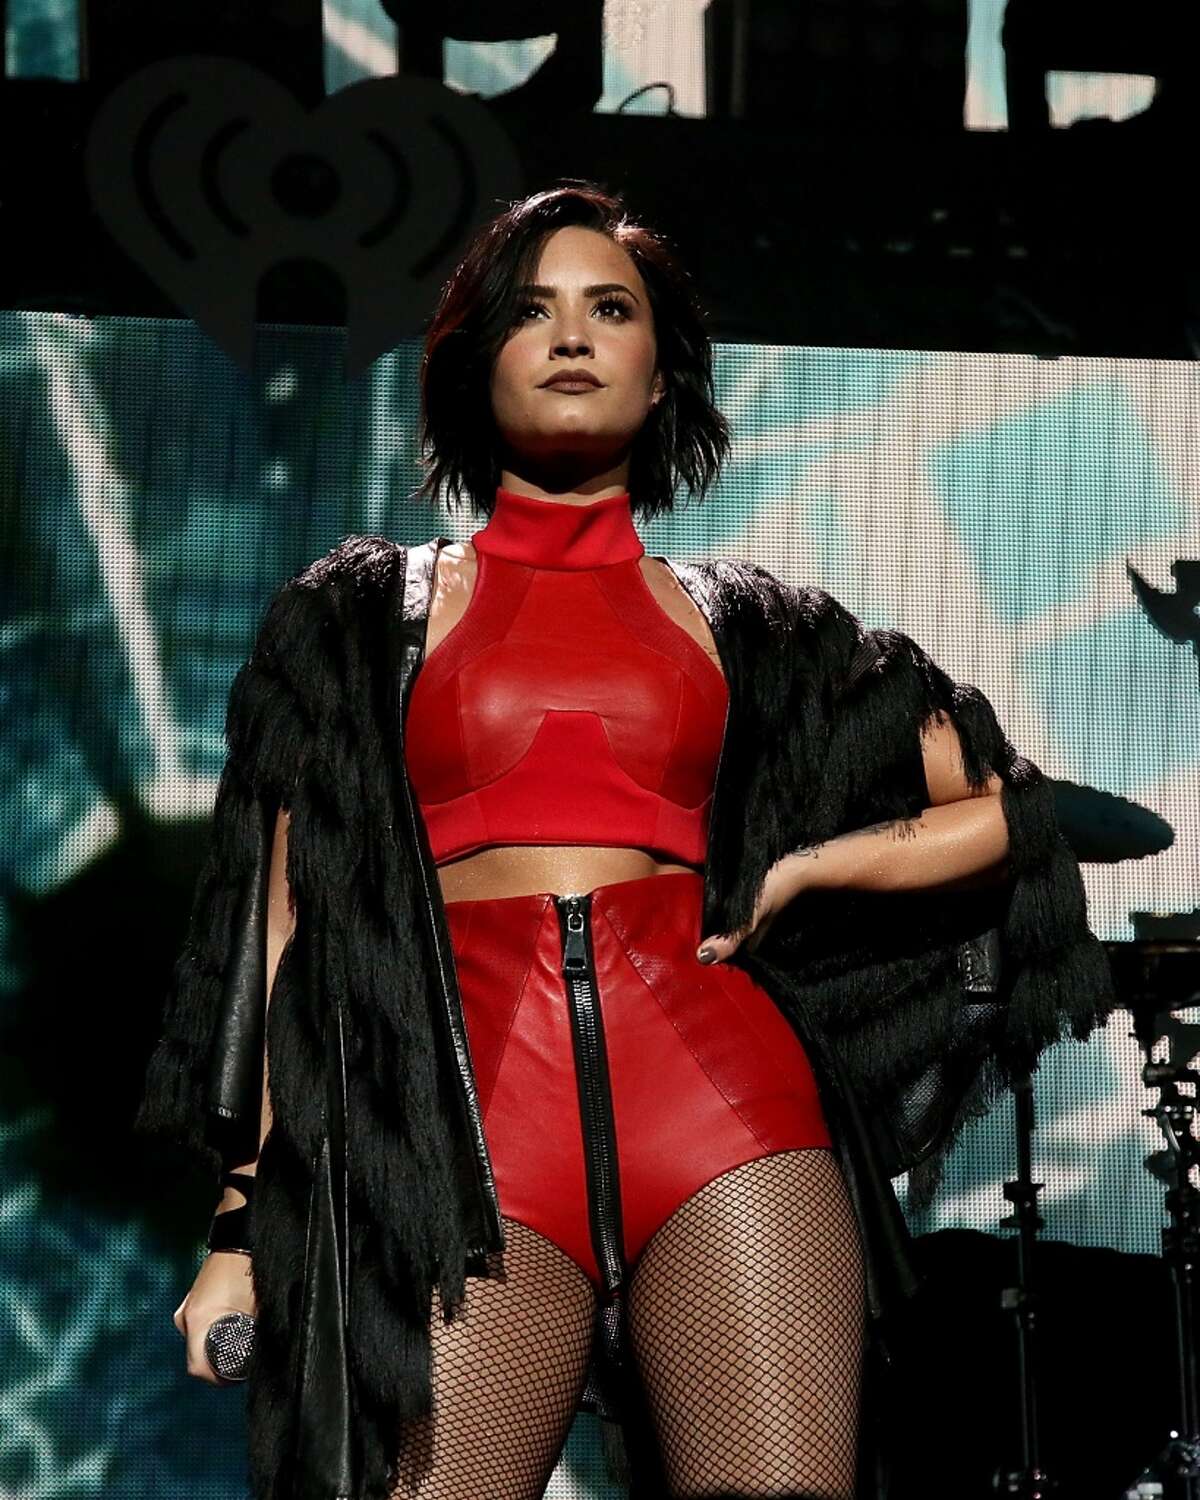 Demi Lovato performs at the iHeart Radio 106.1 KISS FM Jingle Ball at the American Airlines Center on December 1, 2015 in Dallas, Texas.